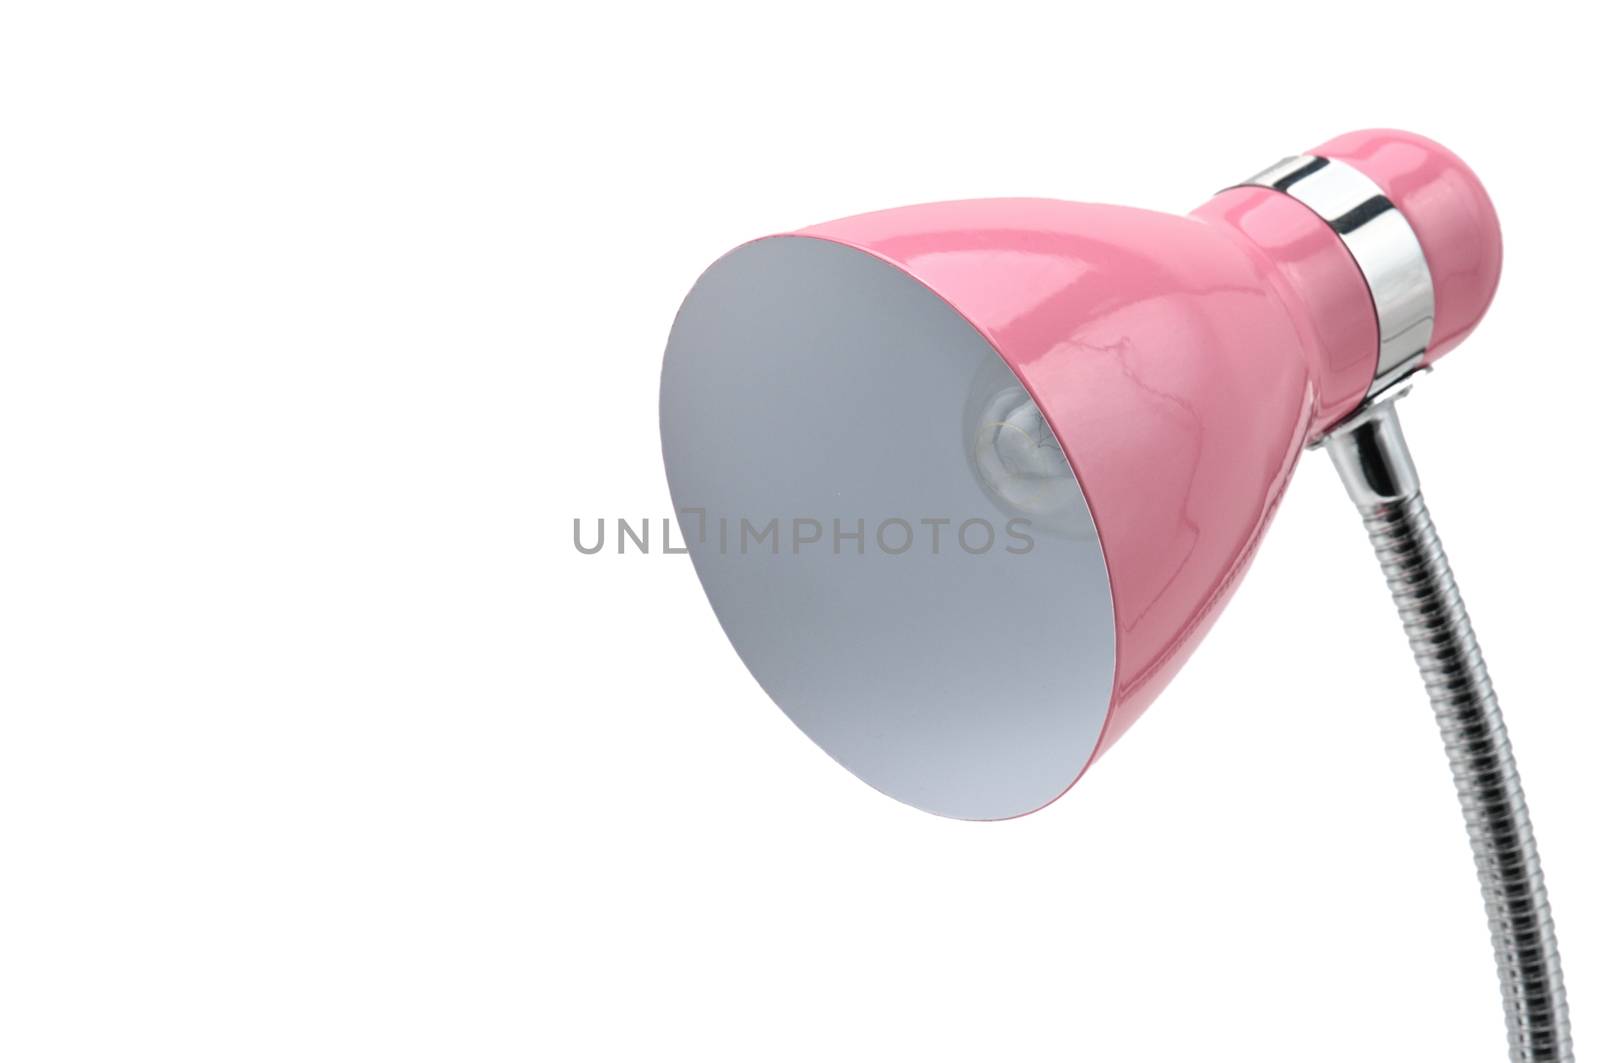 Pink table lamp on an isolated background by moviephoto